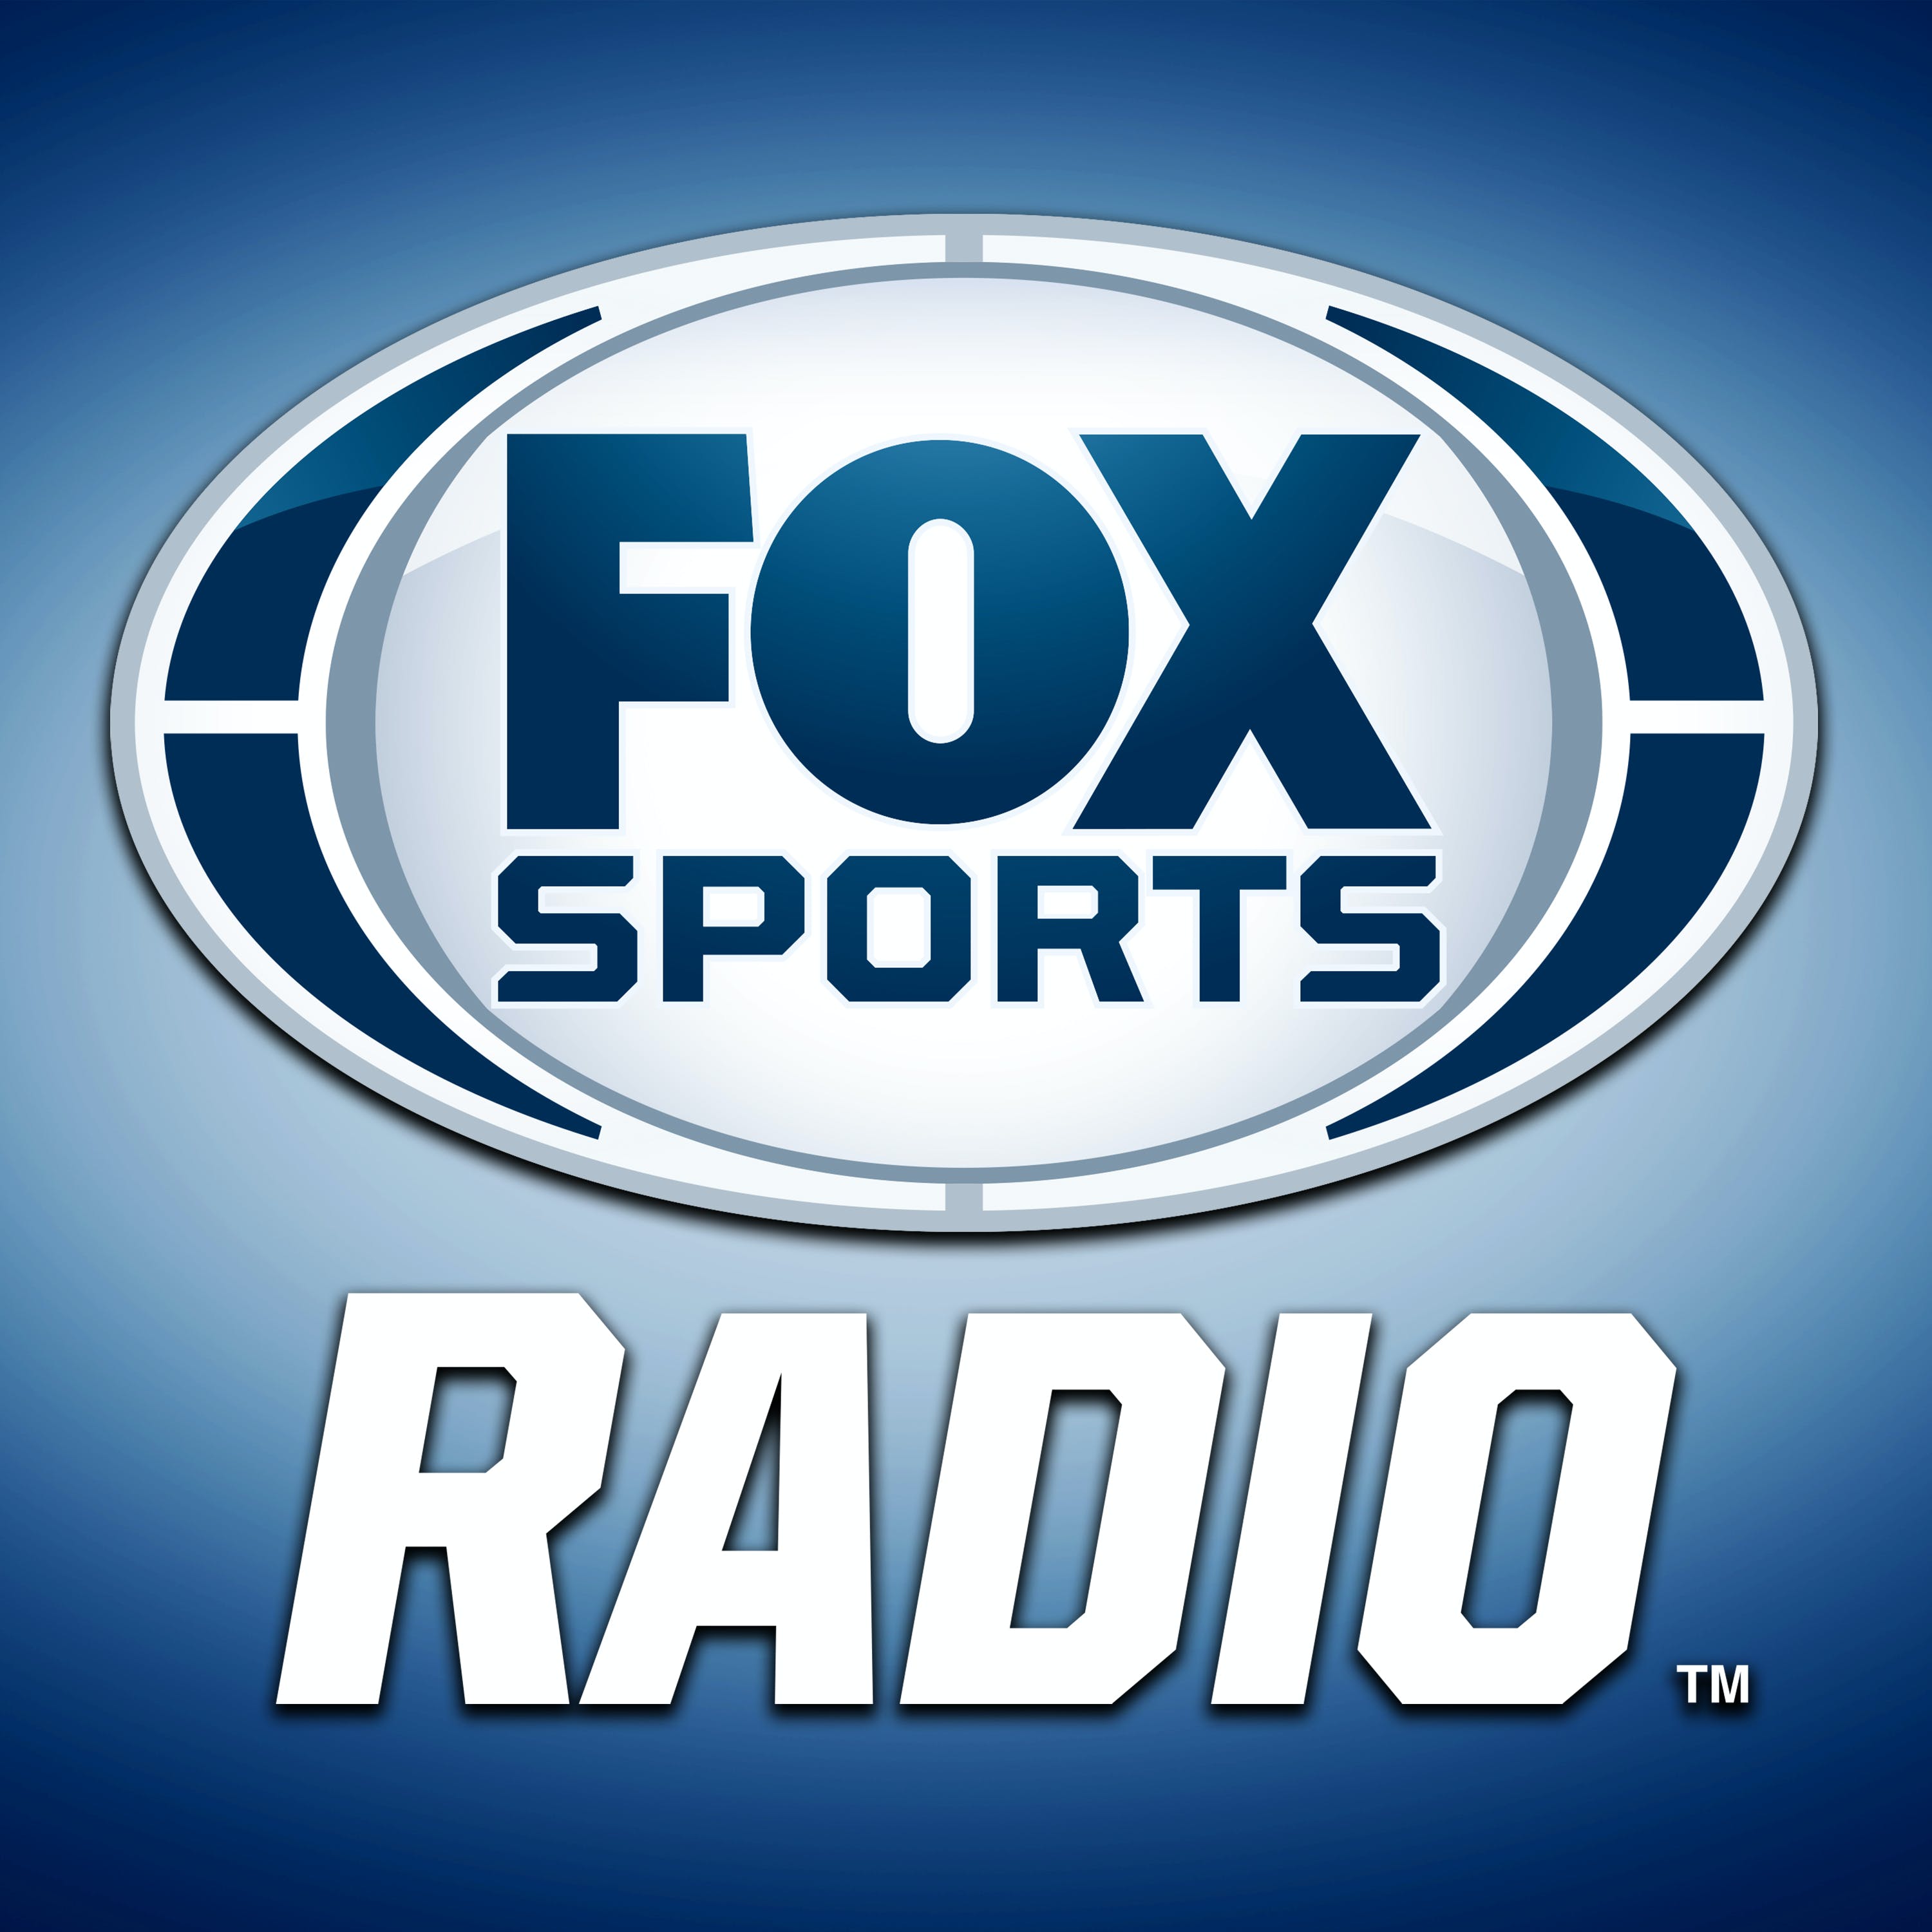 05/09/2021 - FOX Sports Sunday with Andy Furman and Brian Noe